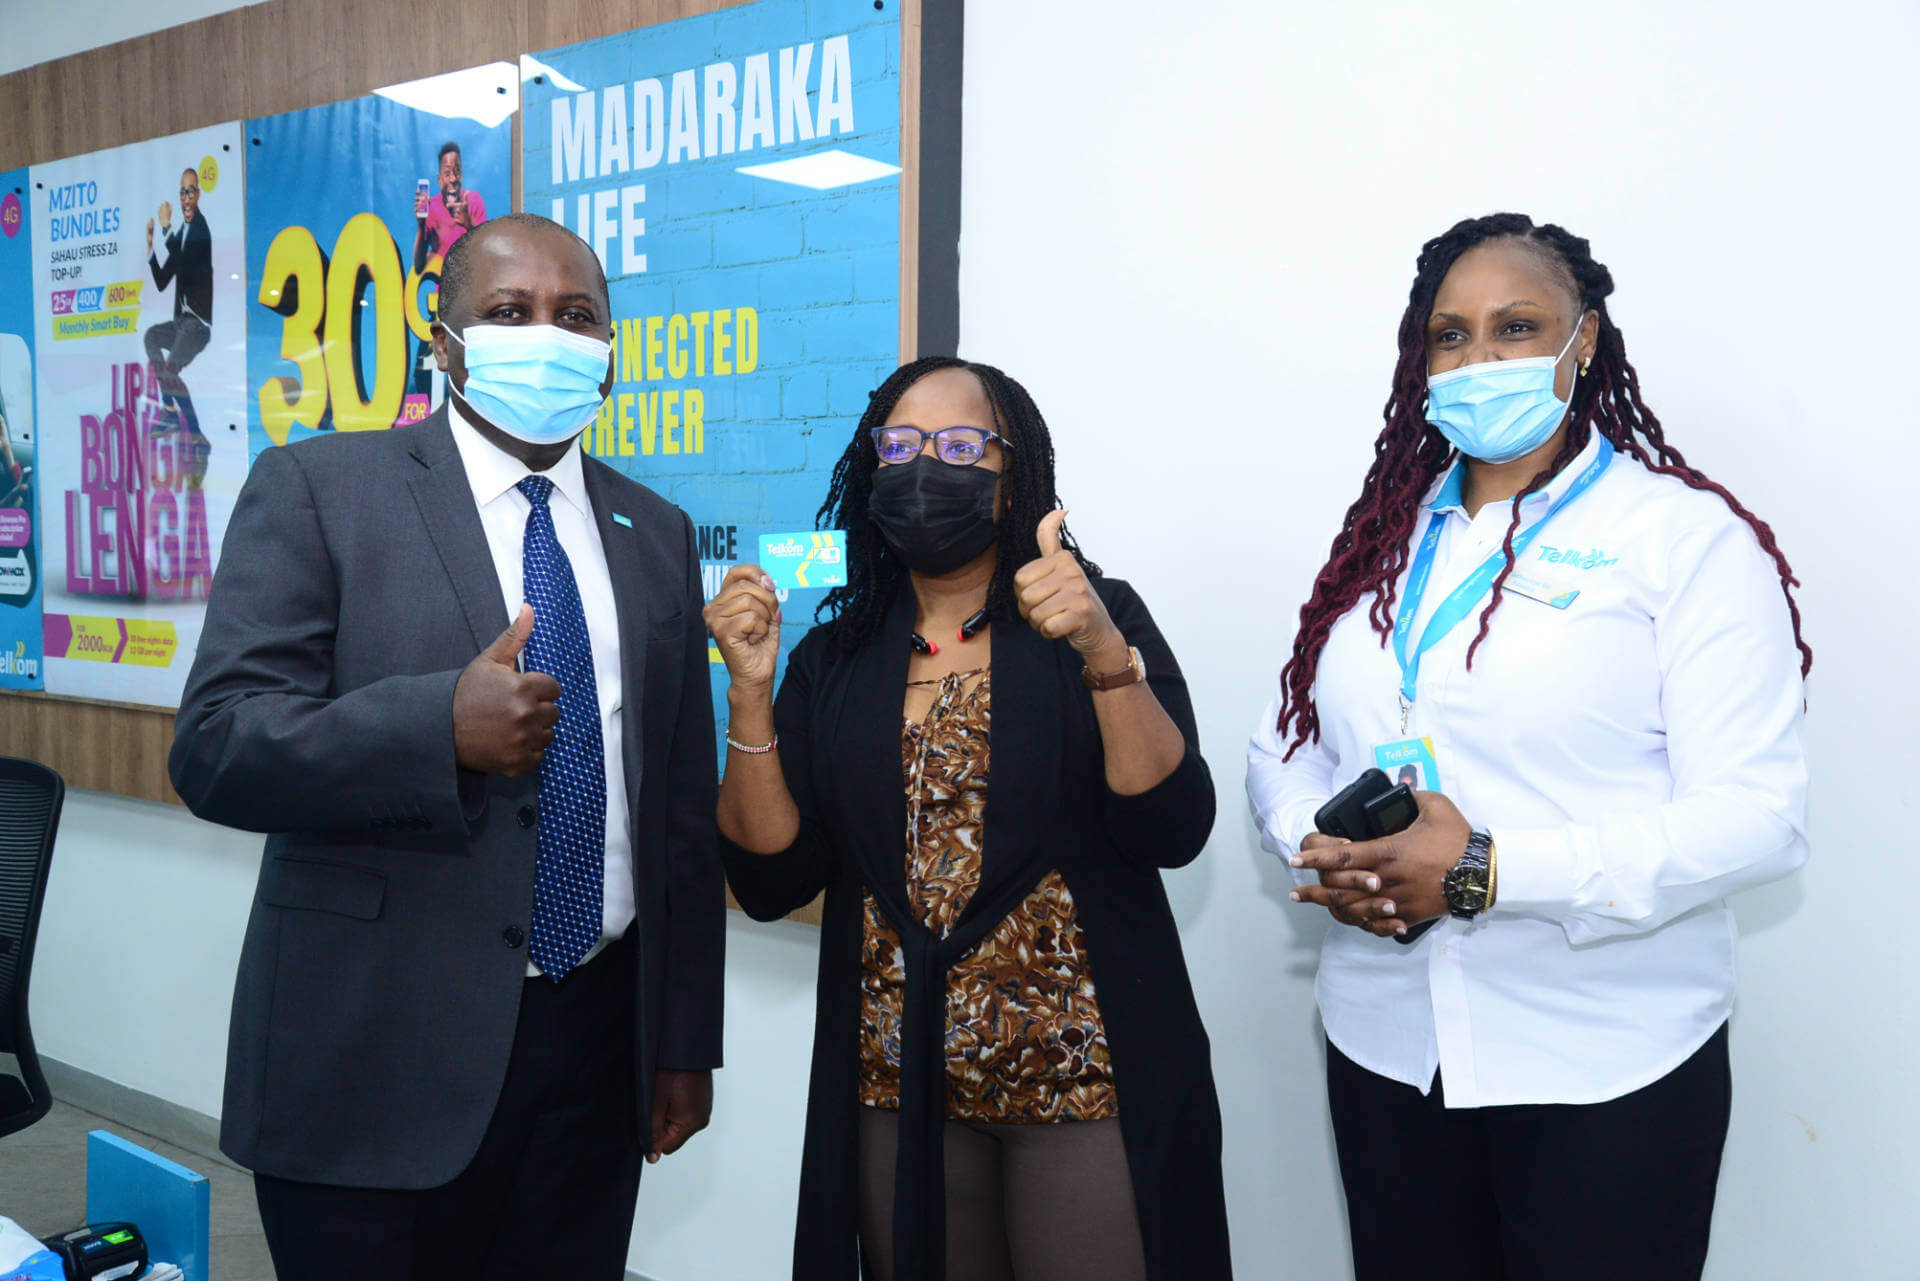 Telkom Kenya launches 'Madaraka Life' with free Data and Minutes for life